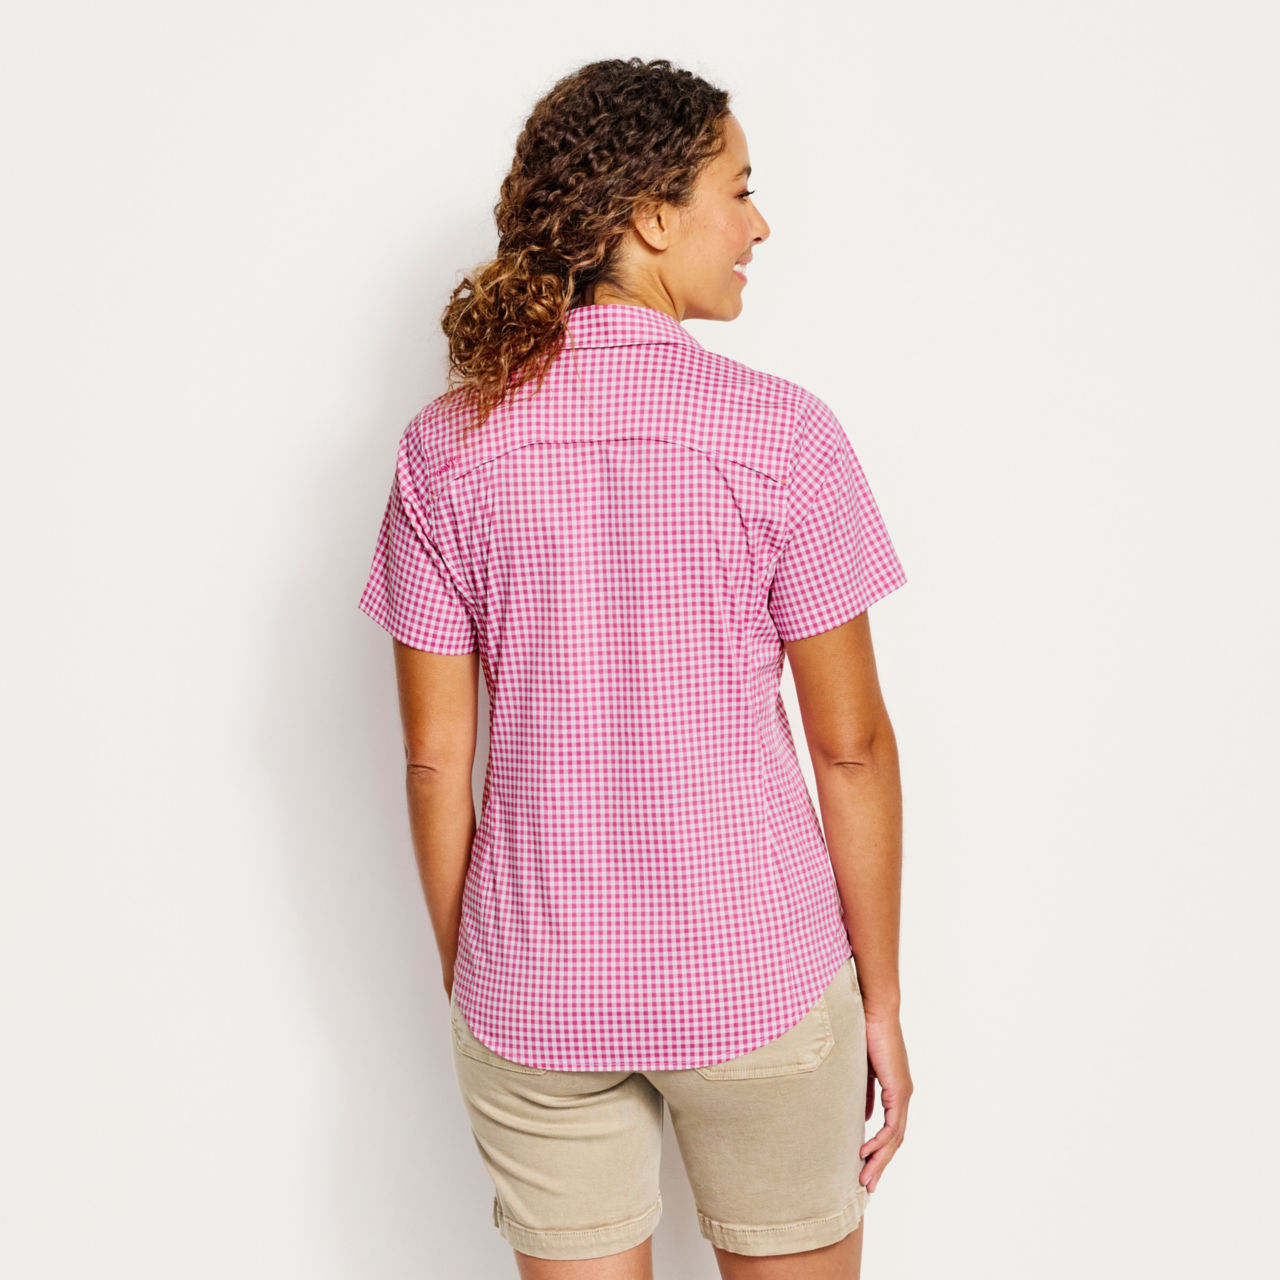 Women's River Guide Short-Sleeved Shirt - PUNCH CHECK image number 2